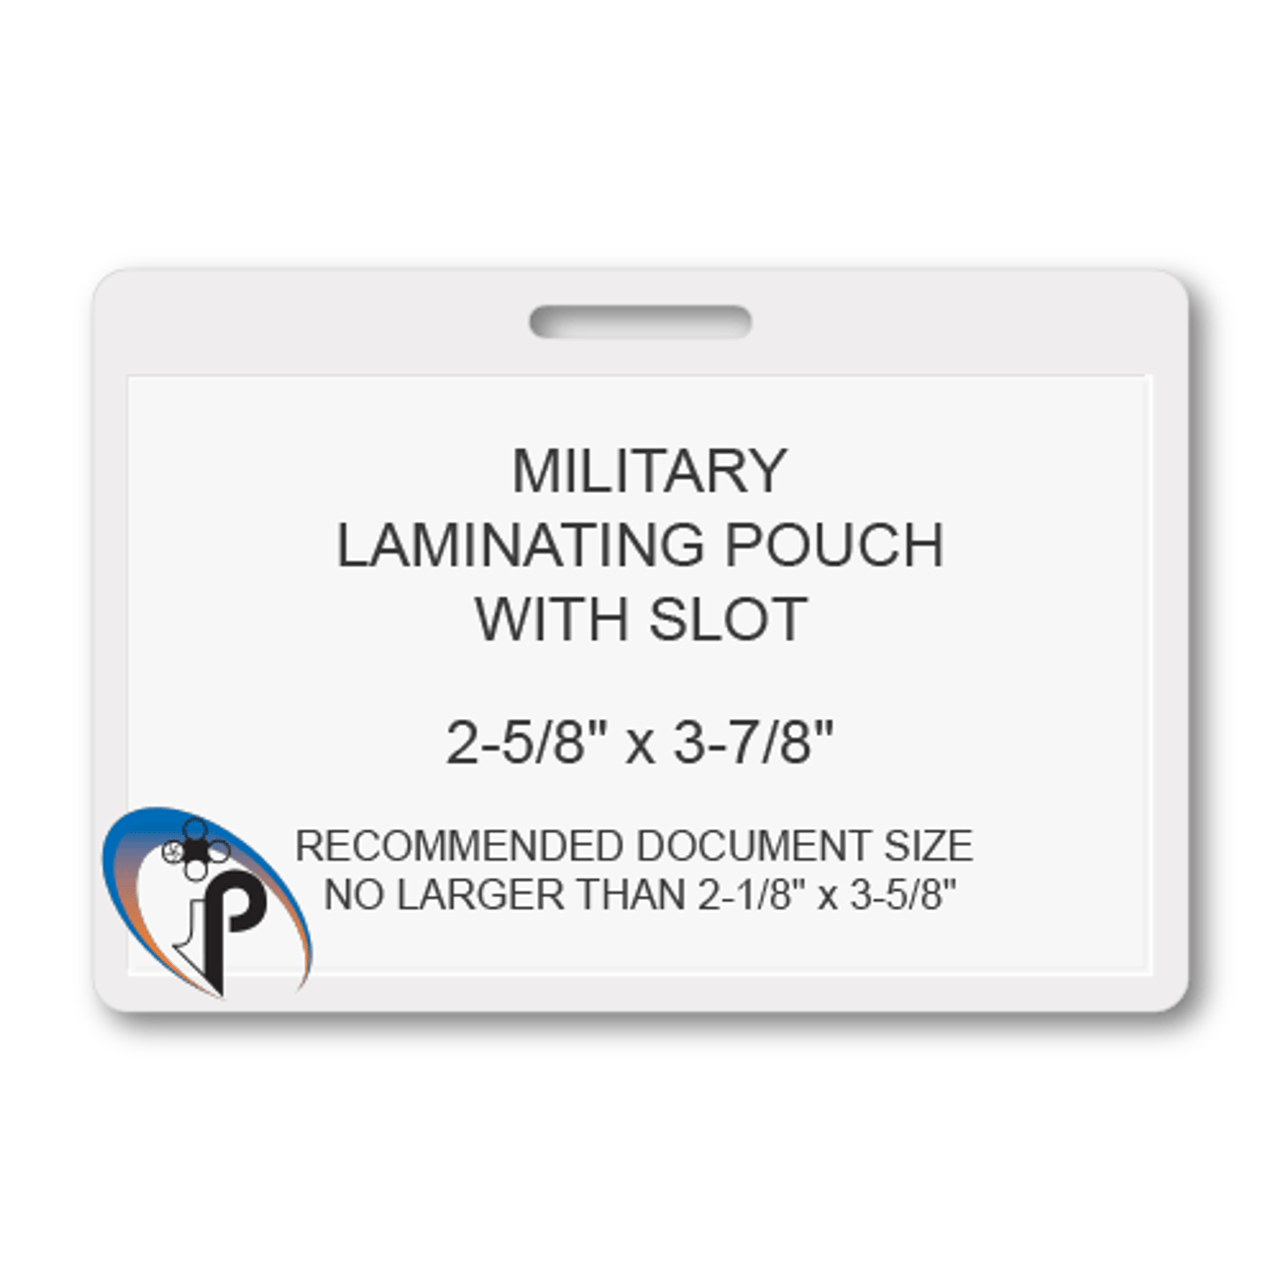 military-laminating-pouch-with-slot-5-mil